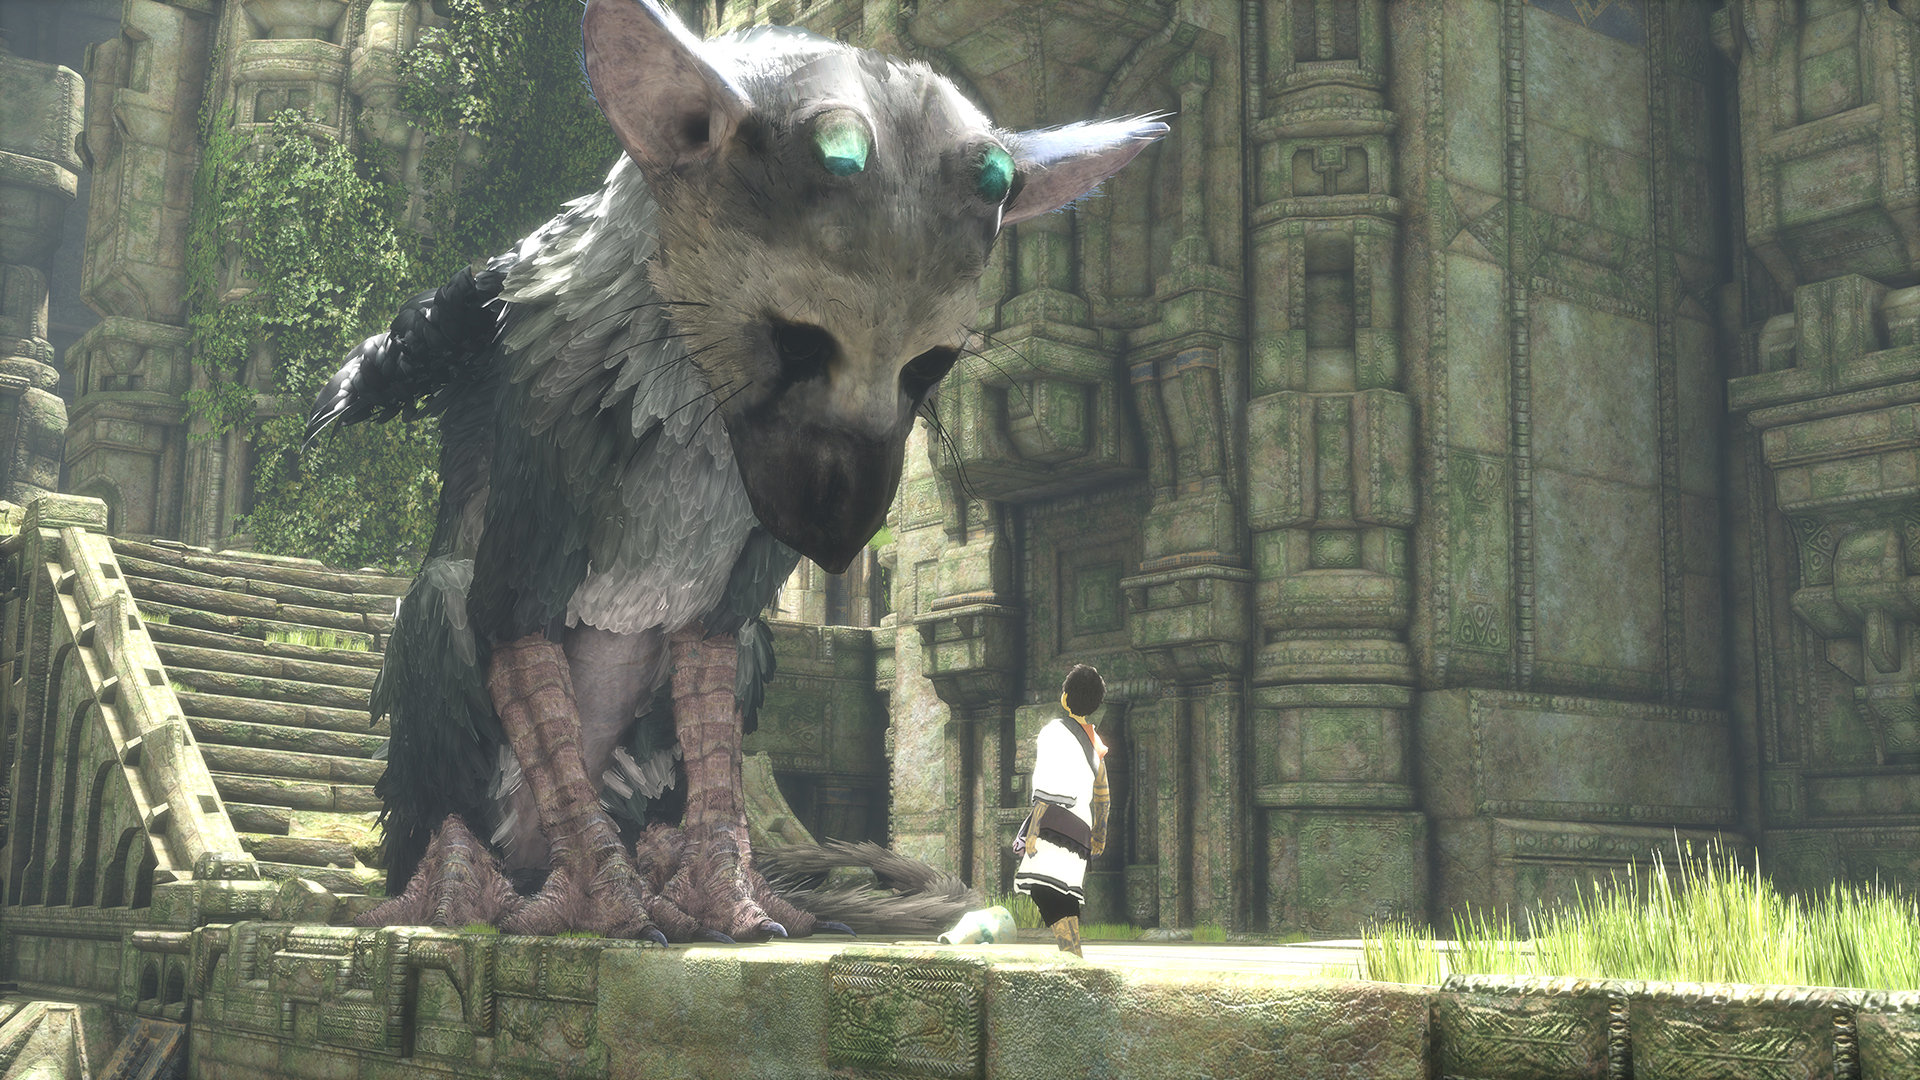 [E3 2016] The Last Guardian gets a Release Date